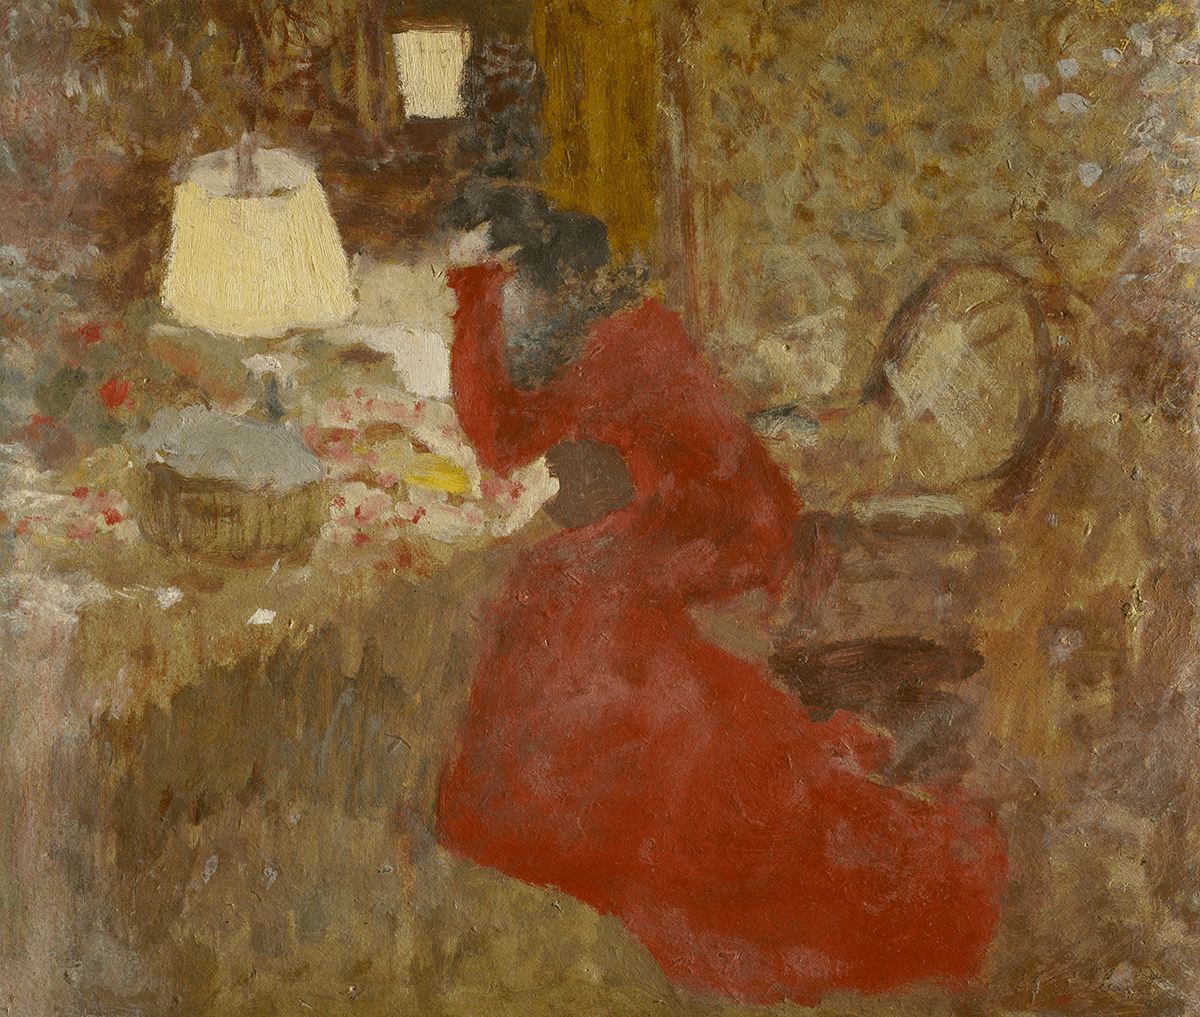 A solitary female figure in profile in a red dress is perched on the edge of an armchair. Head in hand, she hunches over a table with a lamp and basket.